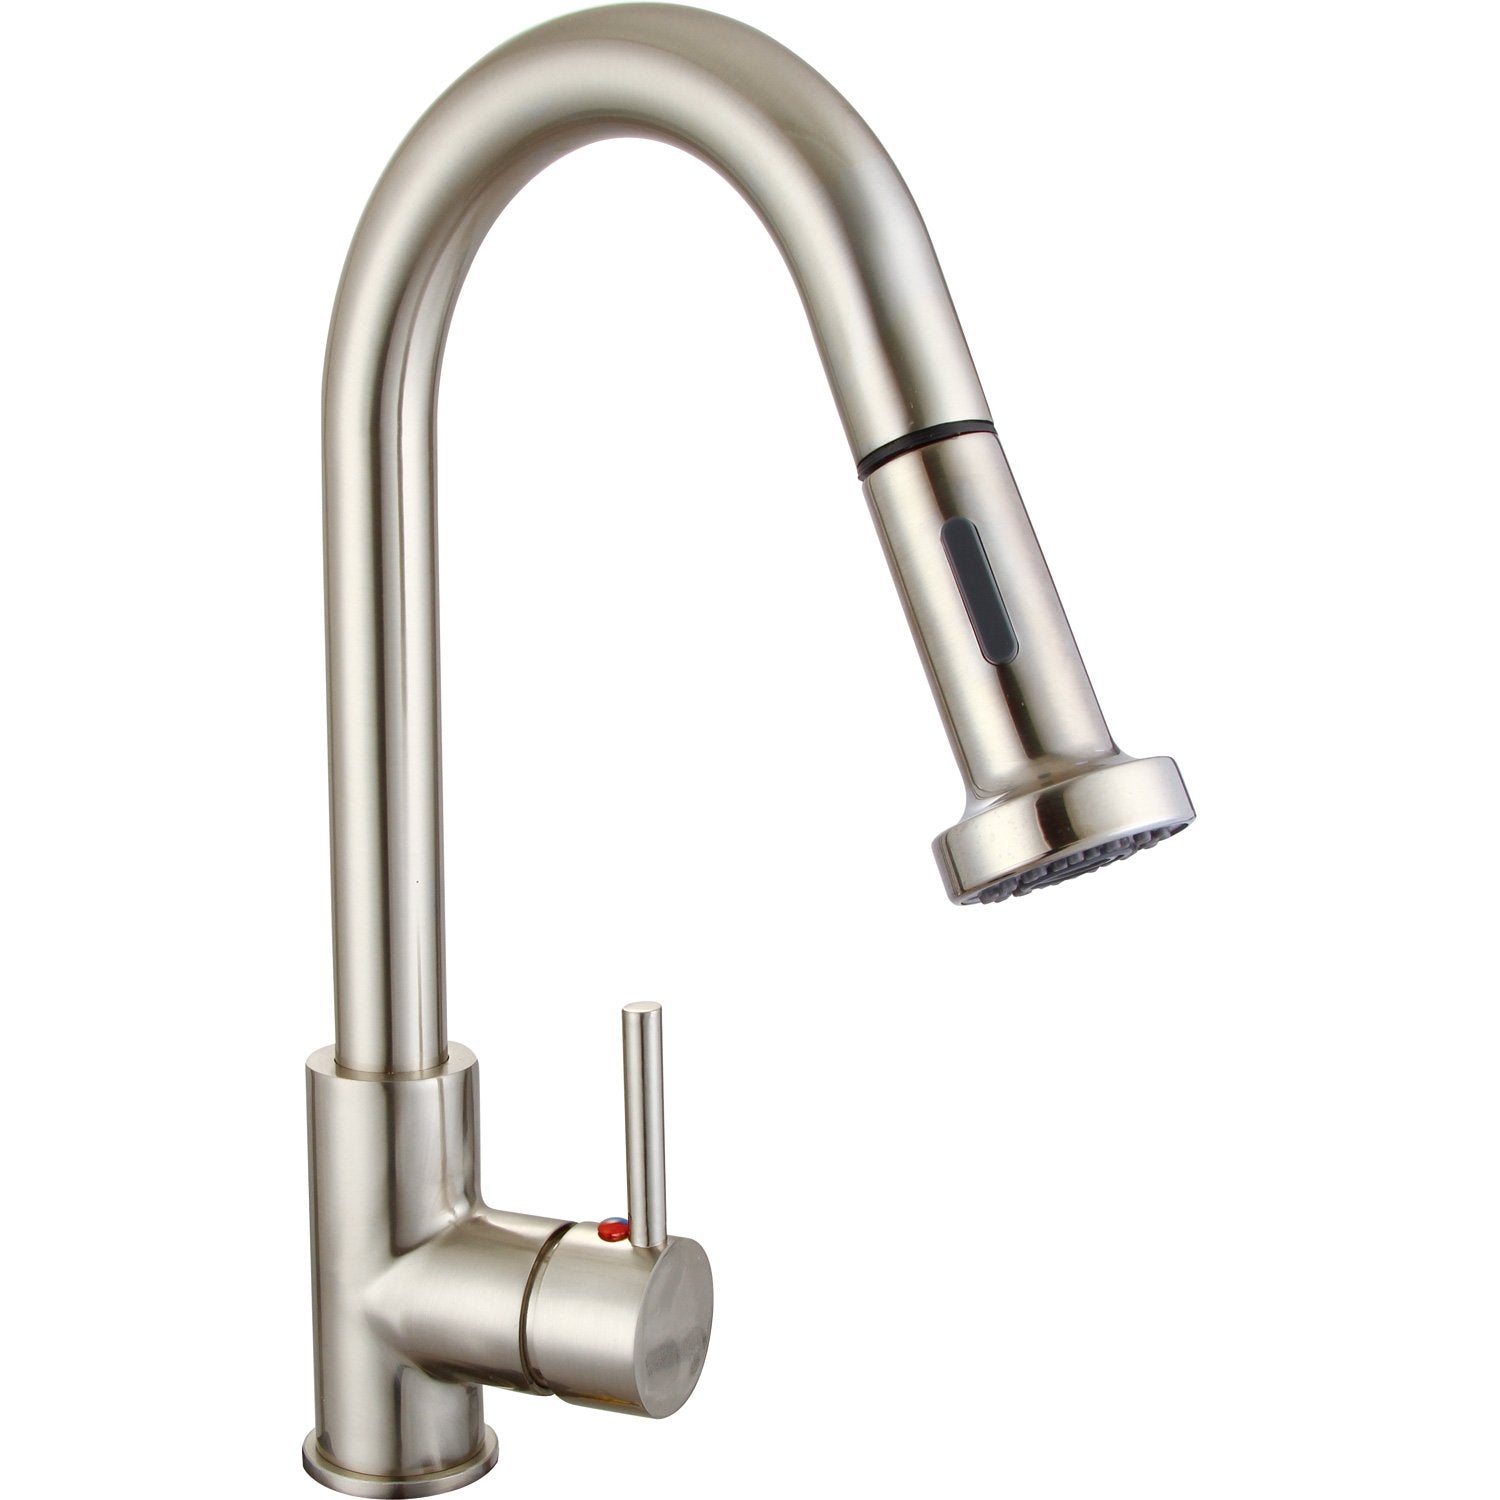 Kitchen Faucet with pull-out flushing shower